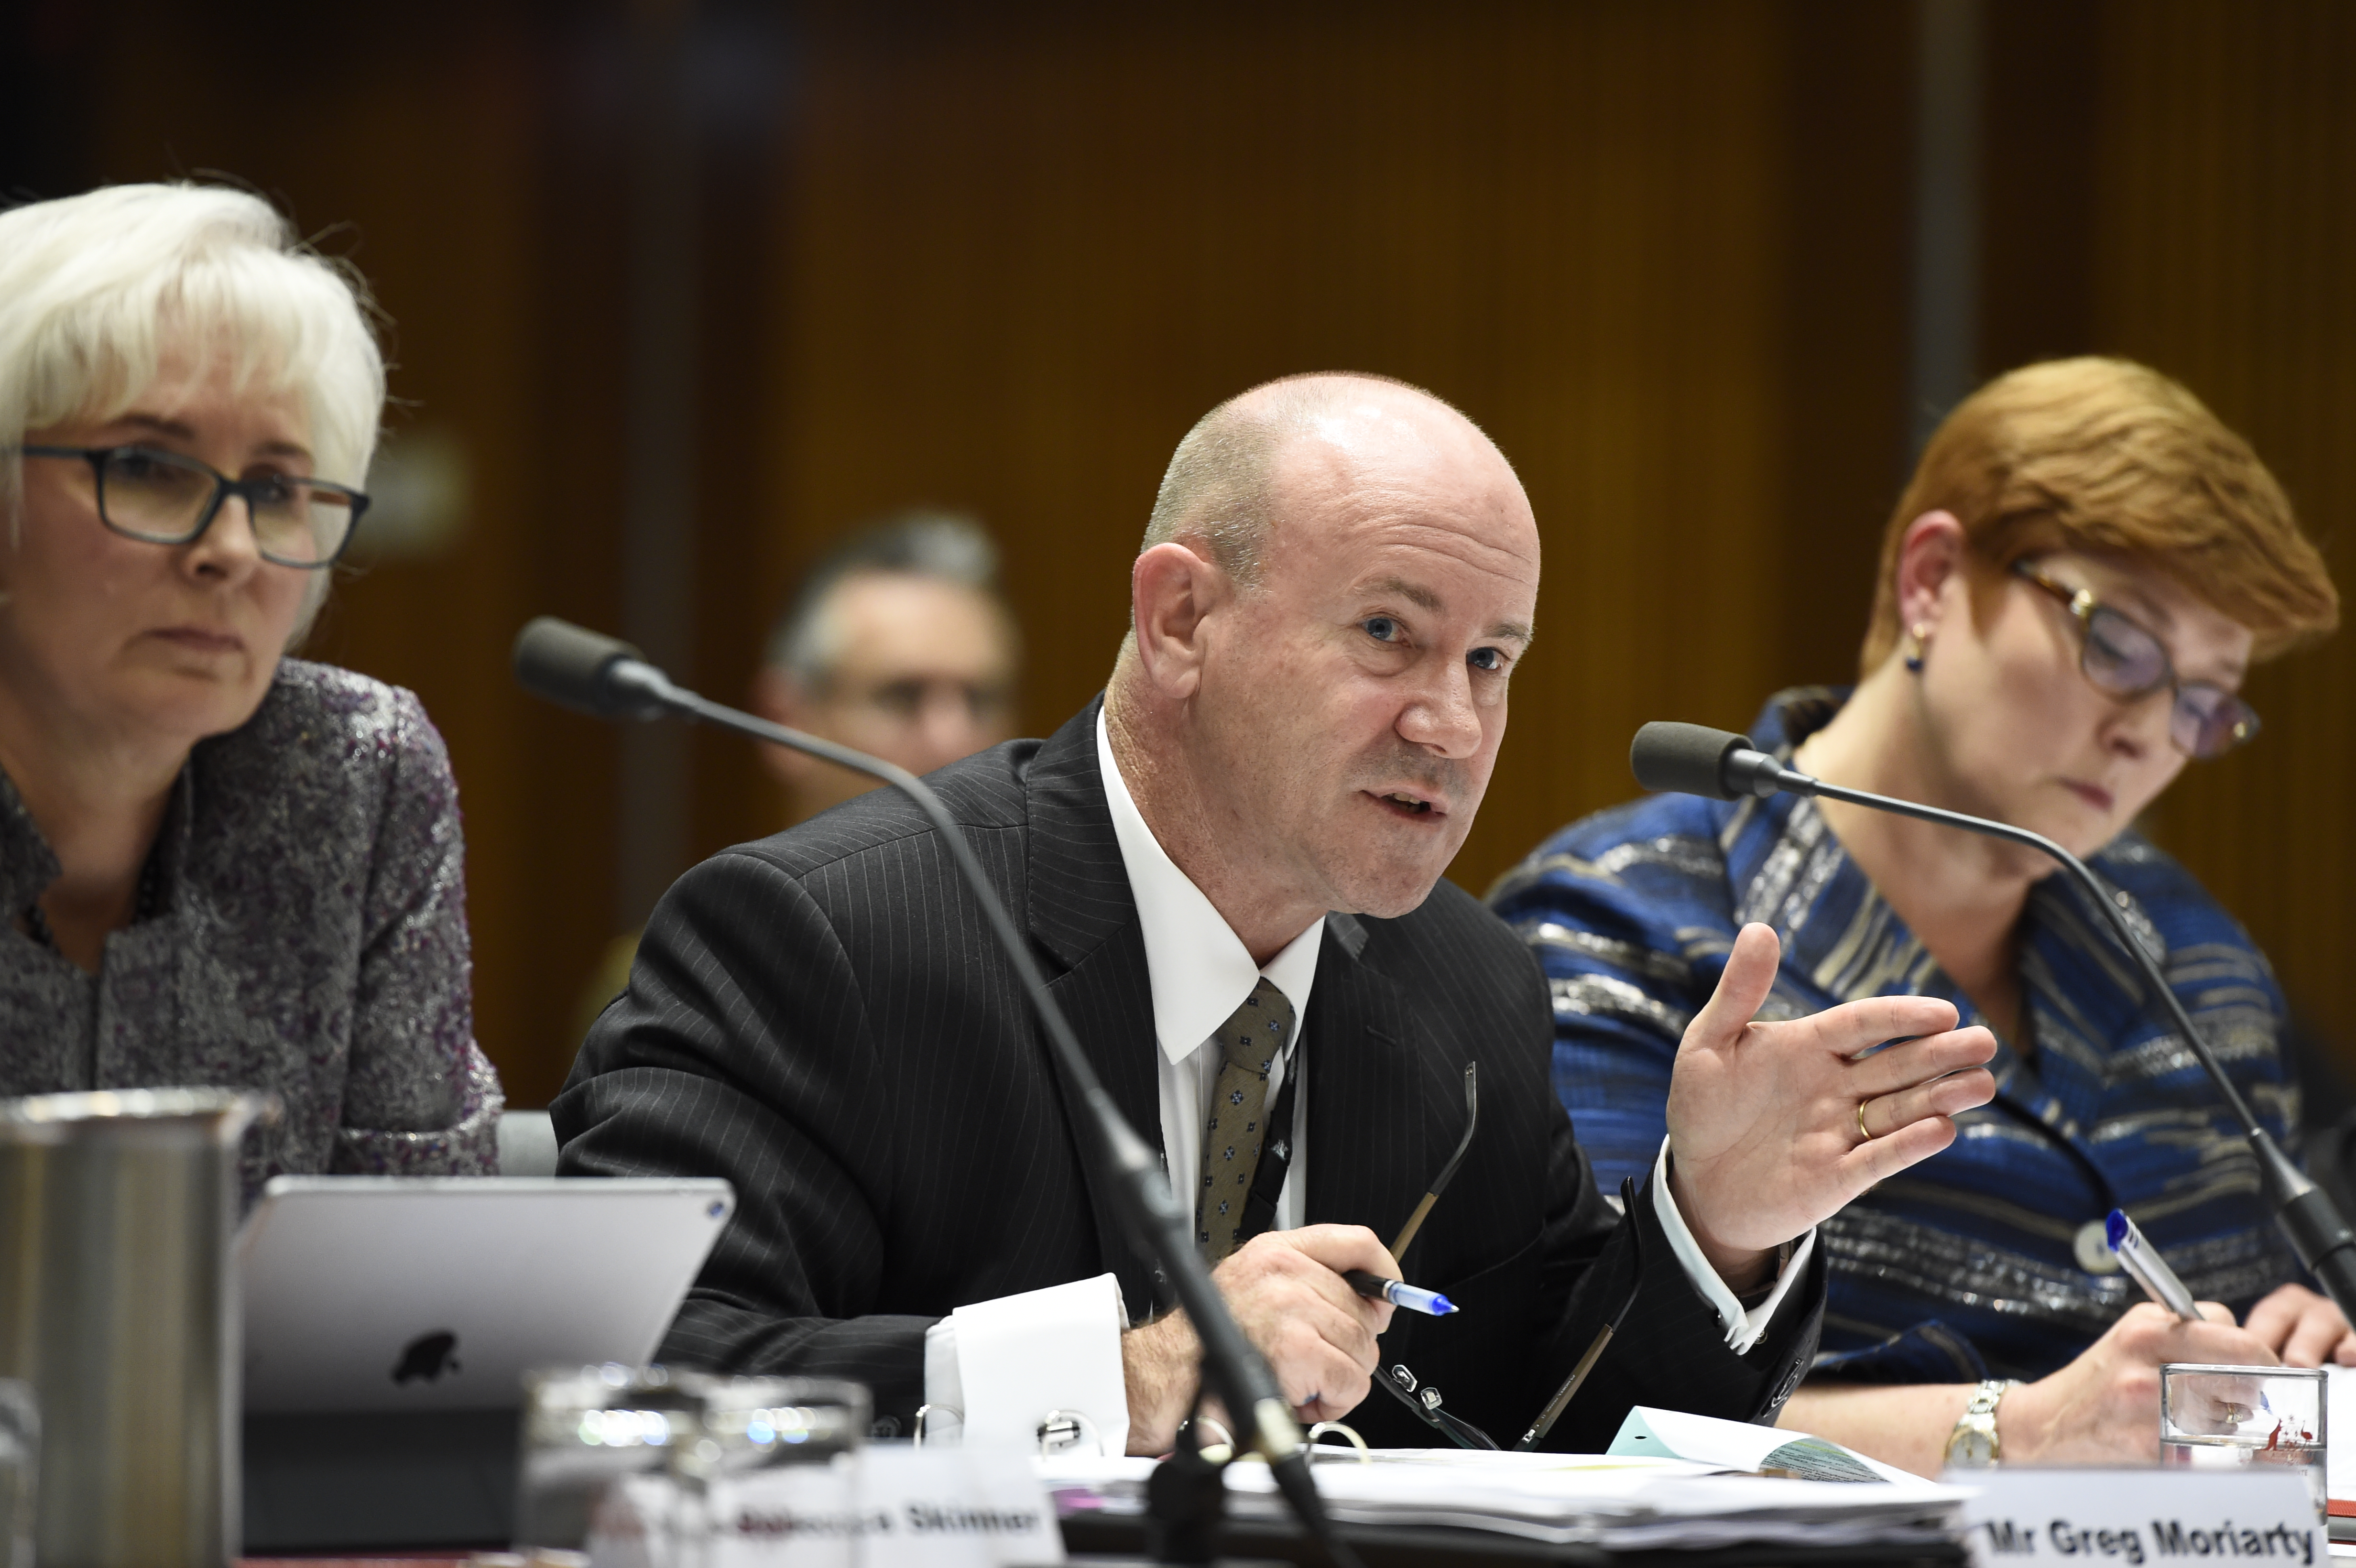 Greg Moriarty, Secretary of the Department of Defence, answering questions with Rebecca Skinner [Acting Associate Secretary, Department of Defence] and Senator the Hon Marise Payne, Minister for Defence (right), 29 May 2018. DPS Auspic.